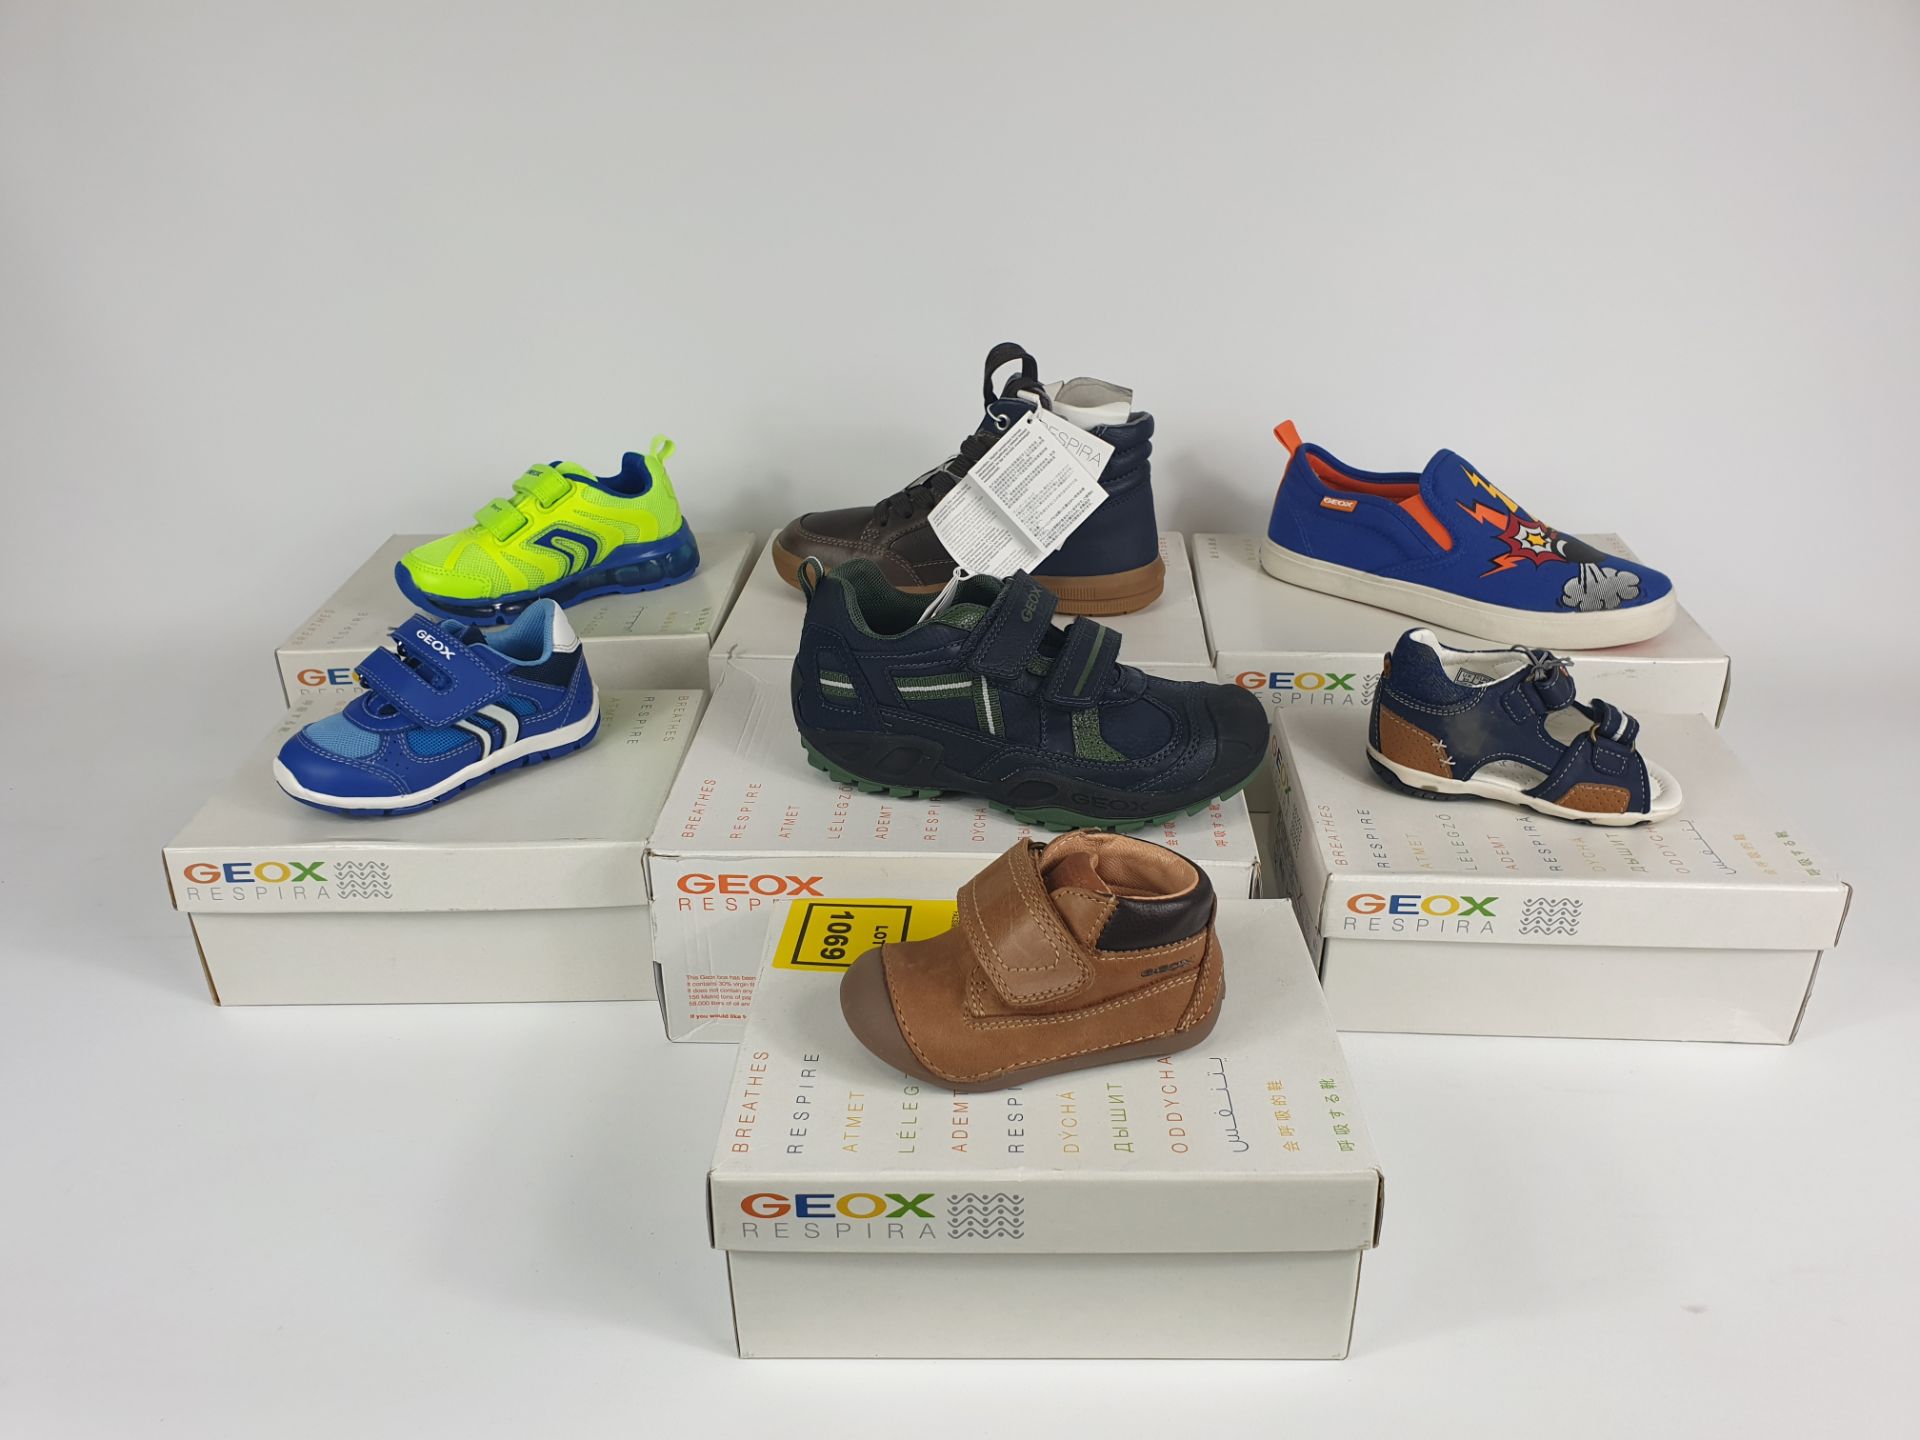 7 X PAIRS OF CHILDRENS GEOX SHOES TOTAL RRP £280.00